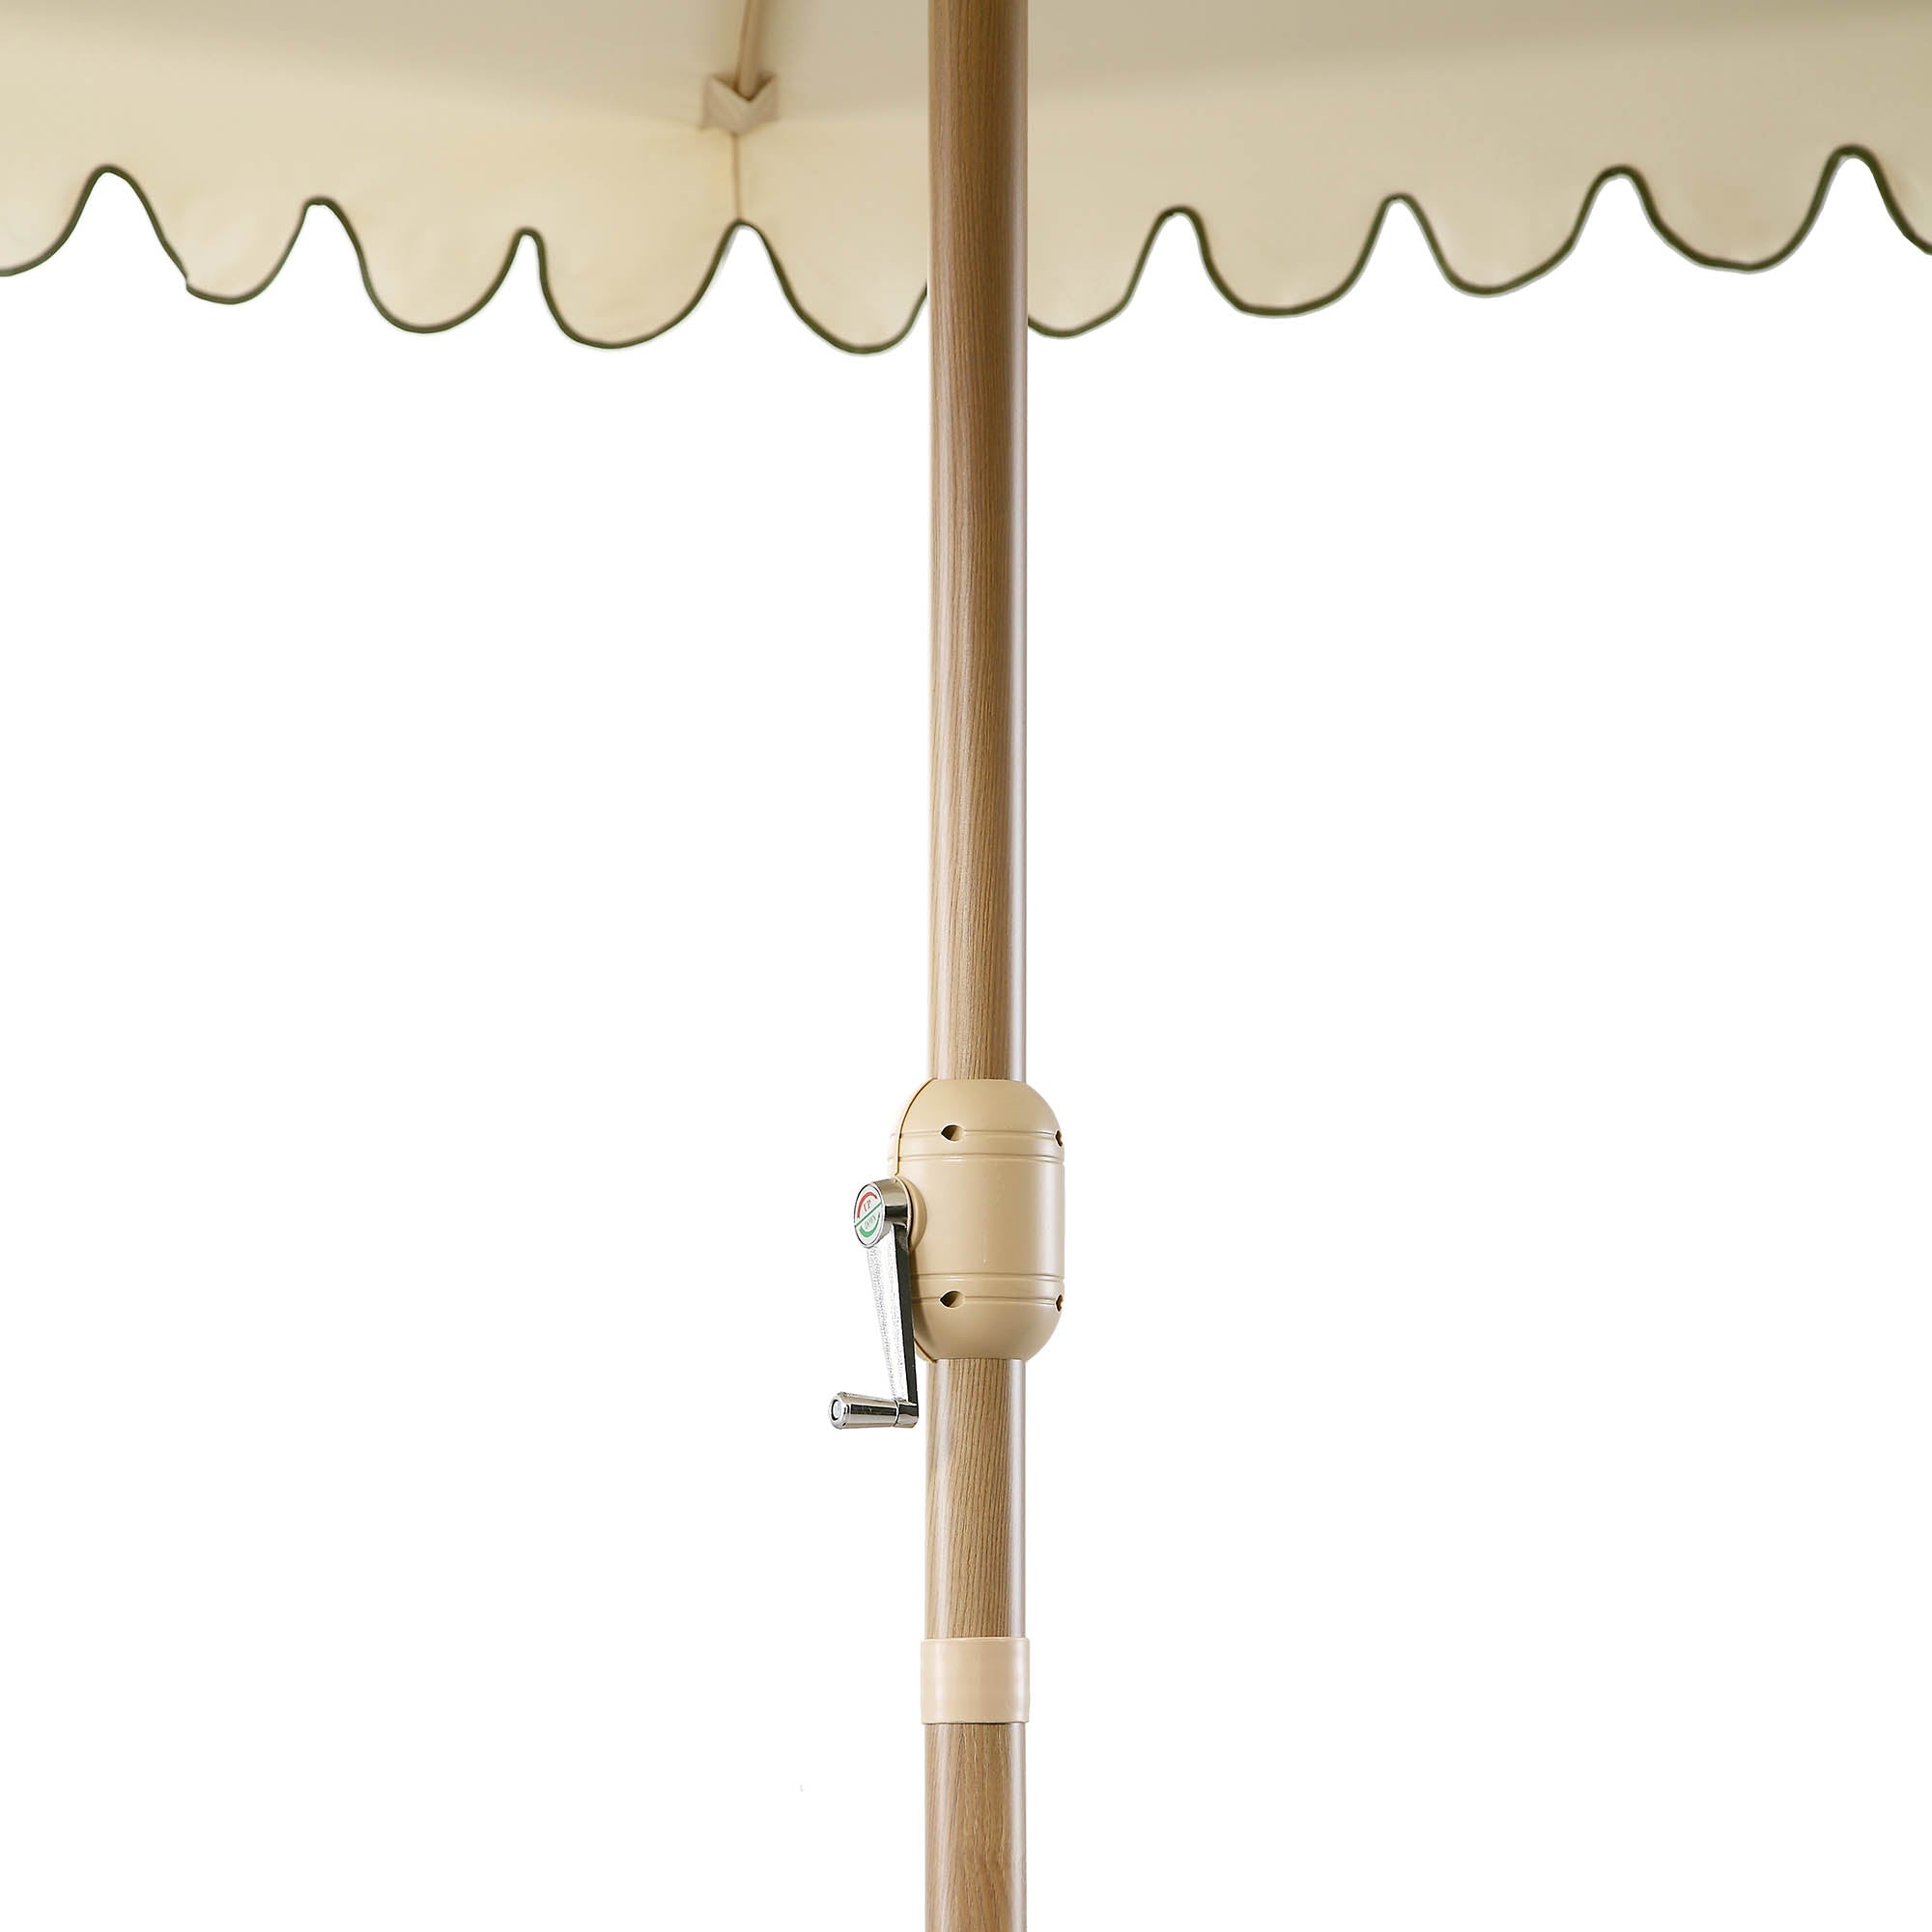 Fabienne Beige 3M Octagonal Double Top Crank and Tilt Parasol with Green Scalloped Edge